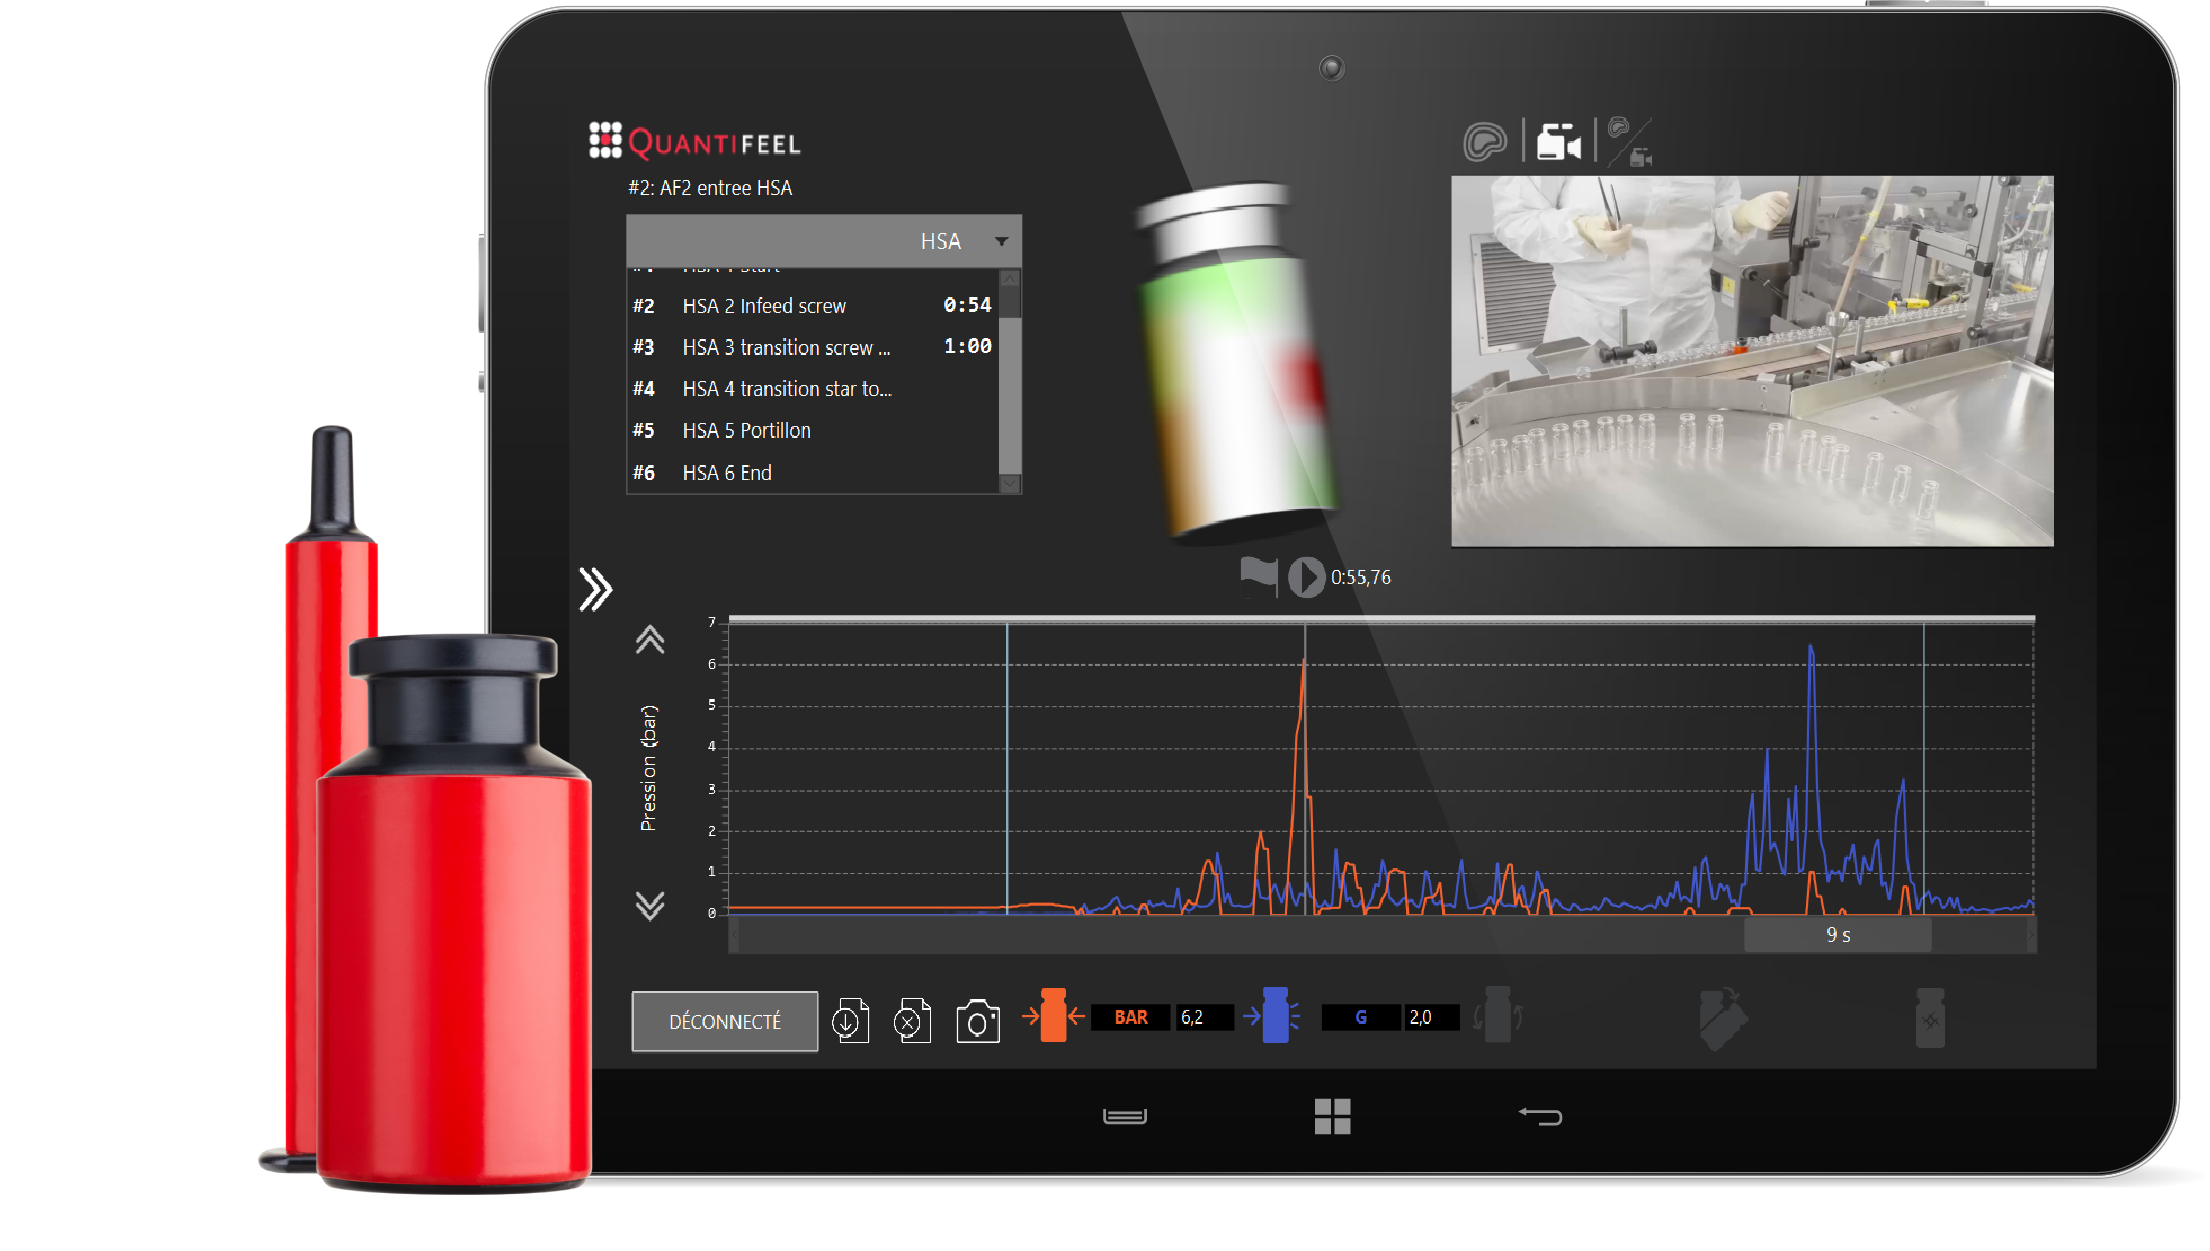 Tablet with Quantifeel Analyzer software showing pressure and shock charts, video footage, and vial pressure map with a syringe and vial drone.